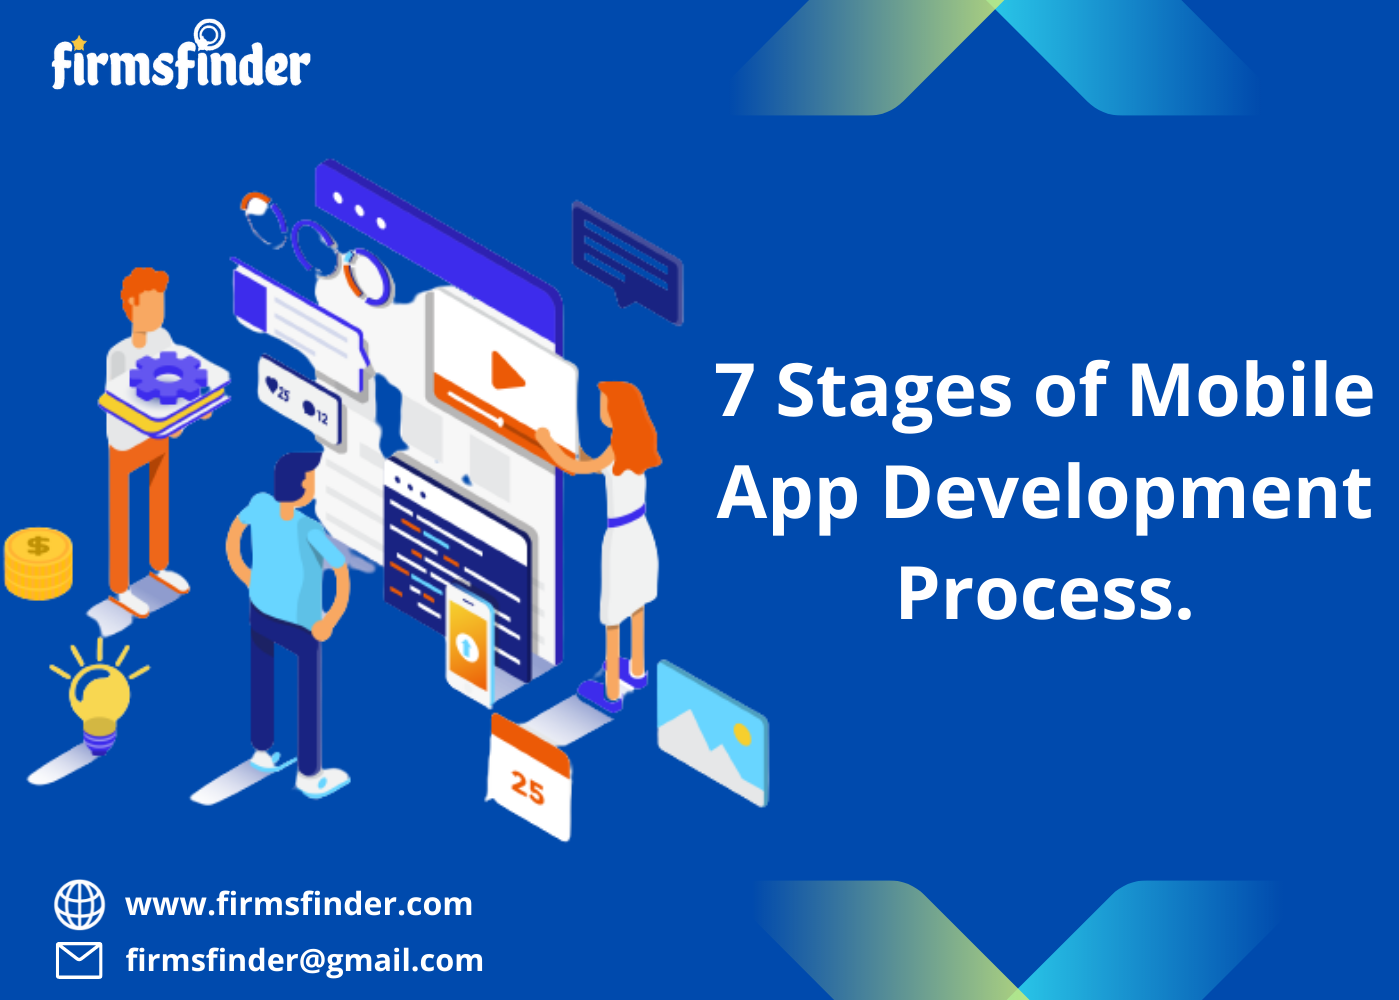 7 Stages of Mobile App Development Process